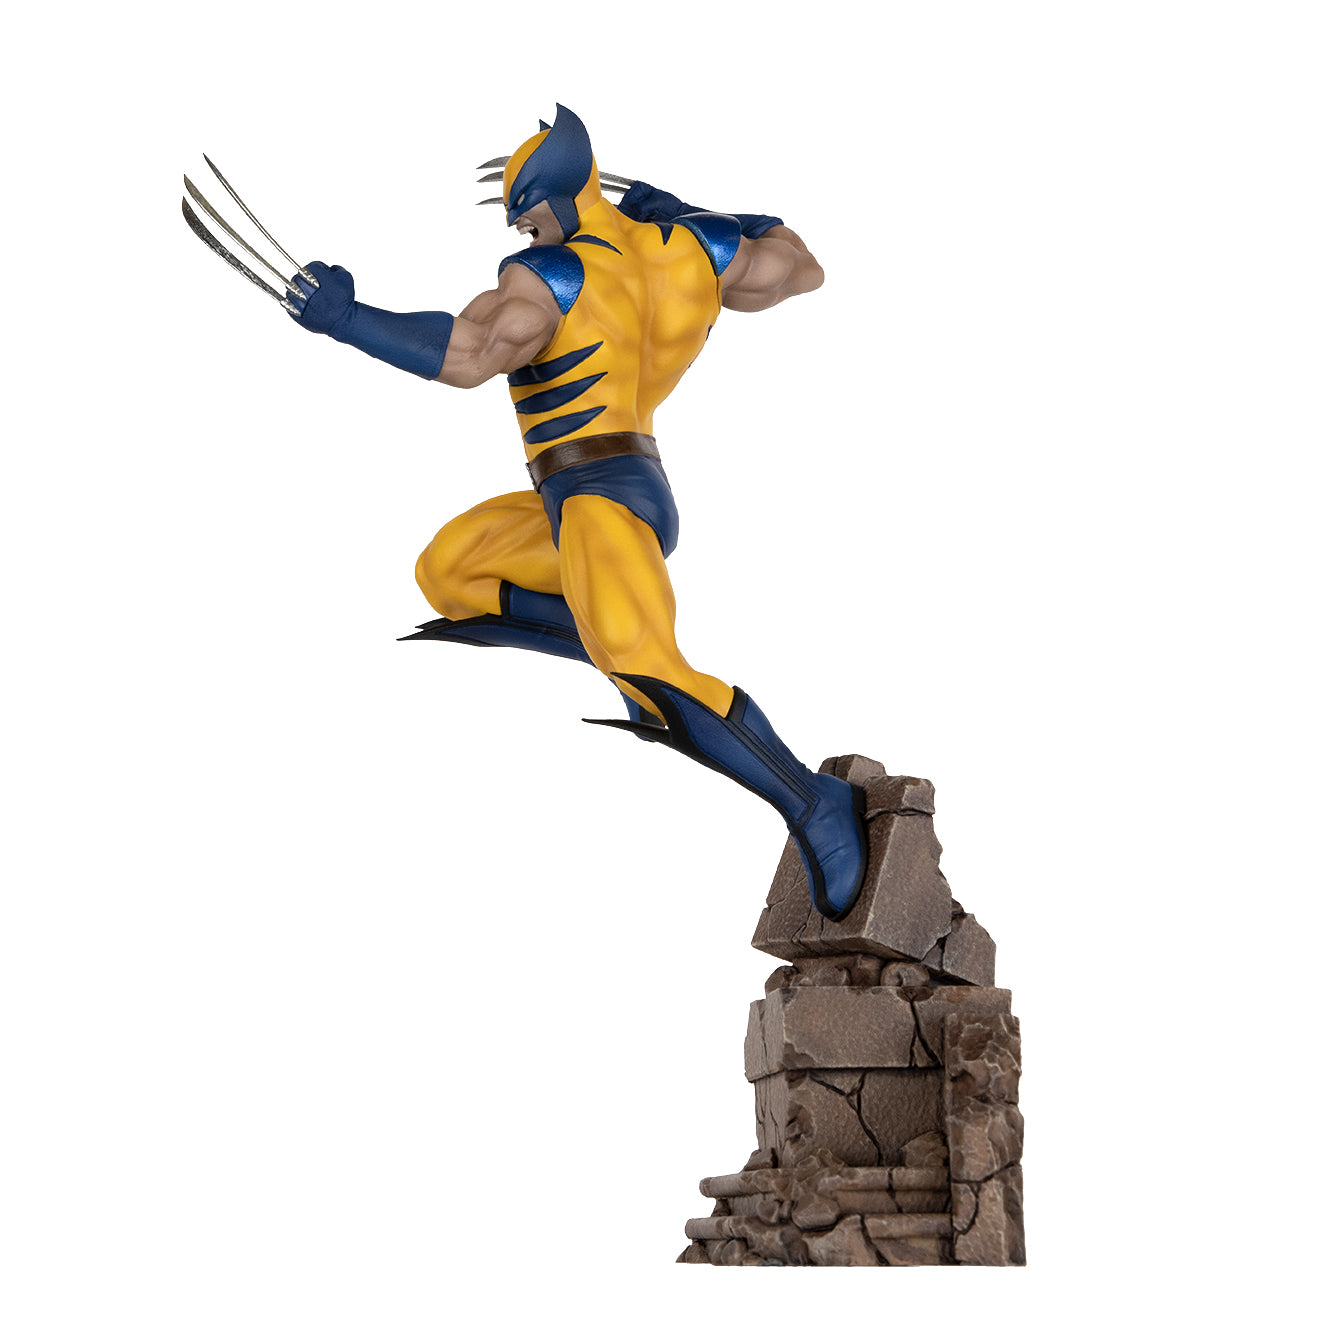 Marvel Future Fight Wolverine 1:10 Scale Statue by PCS Collectibles -PCS Studios - India - www.superherotoystore.com